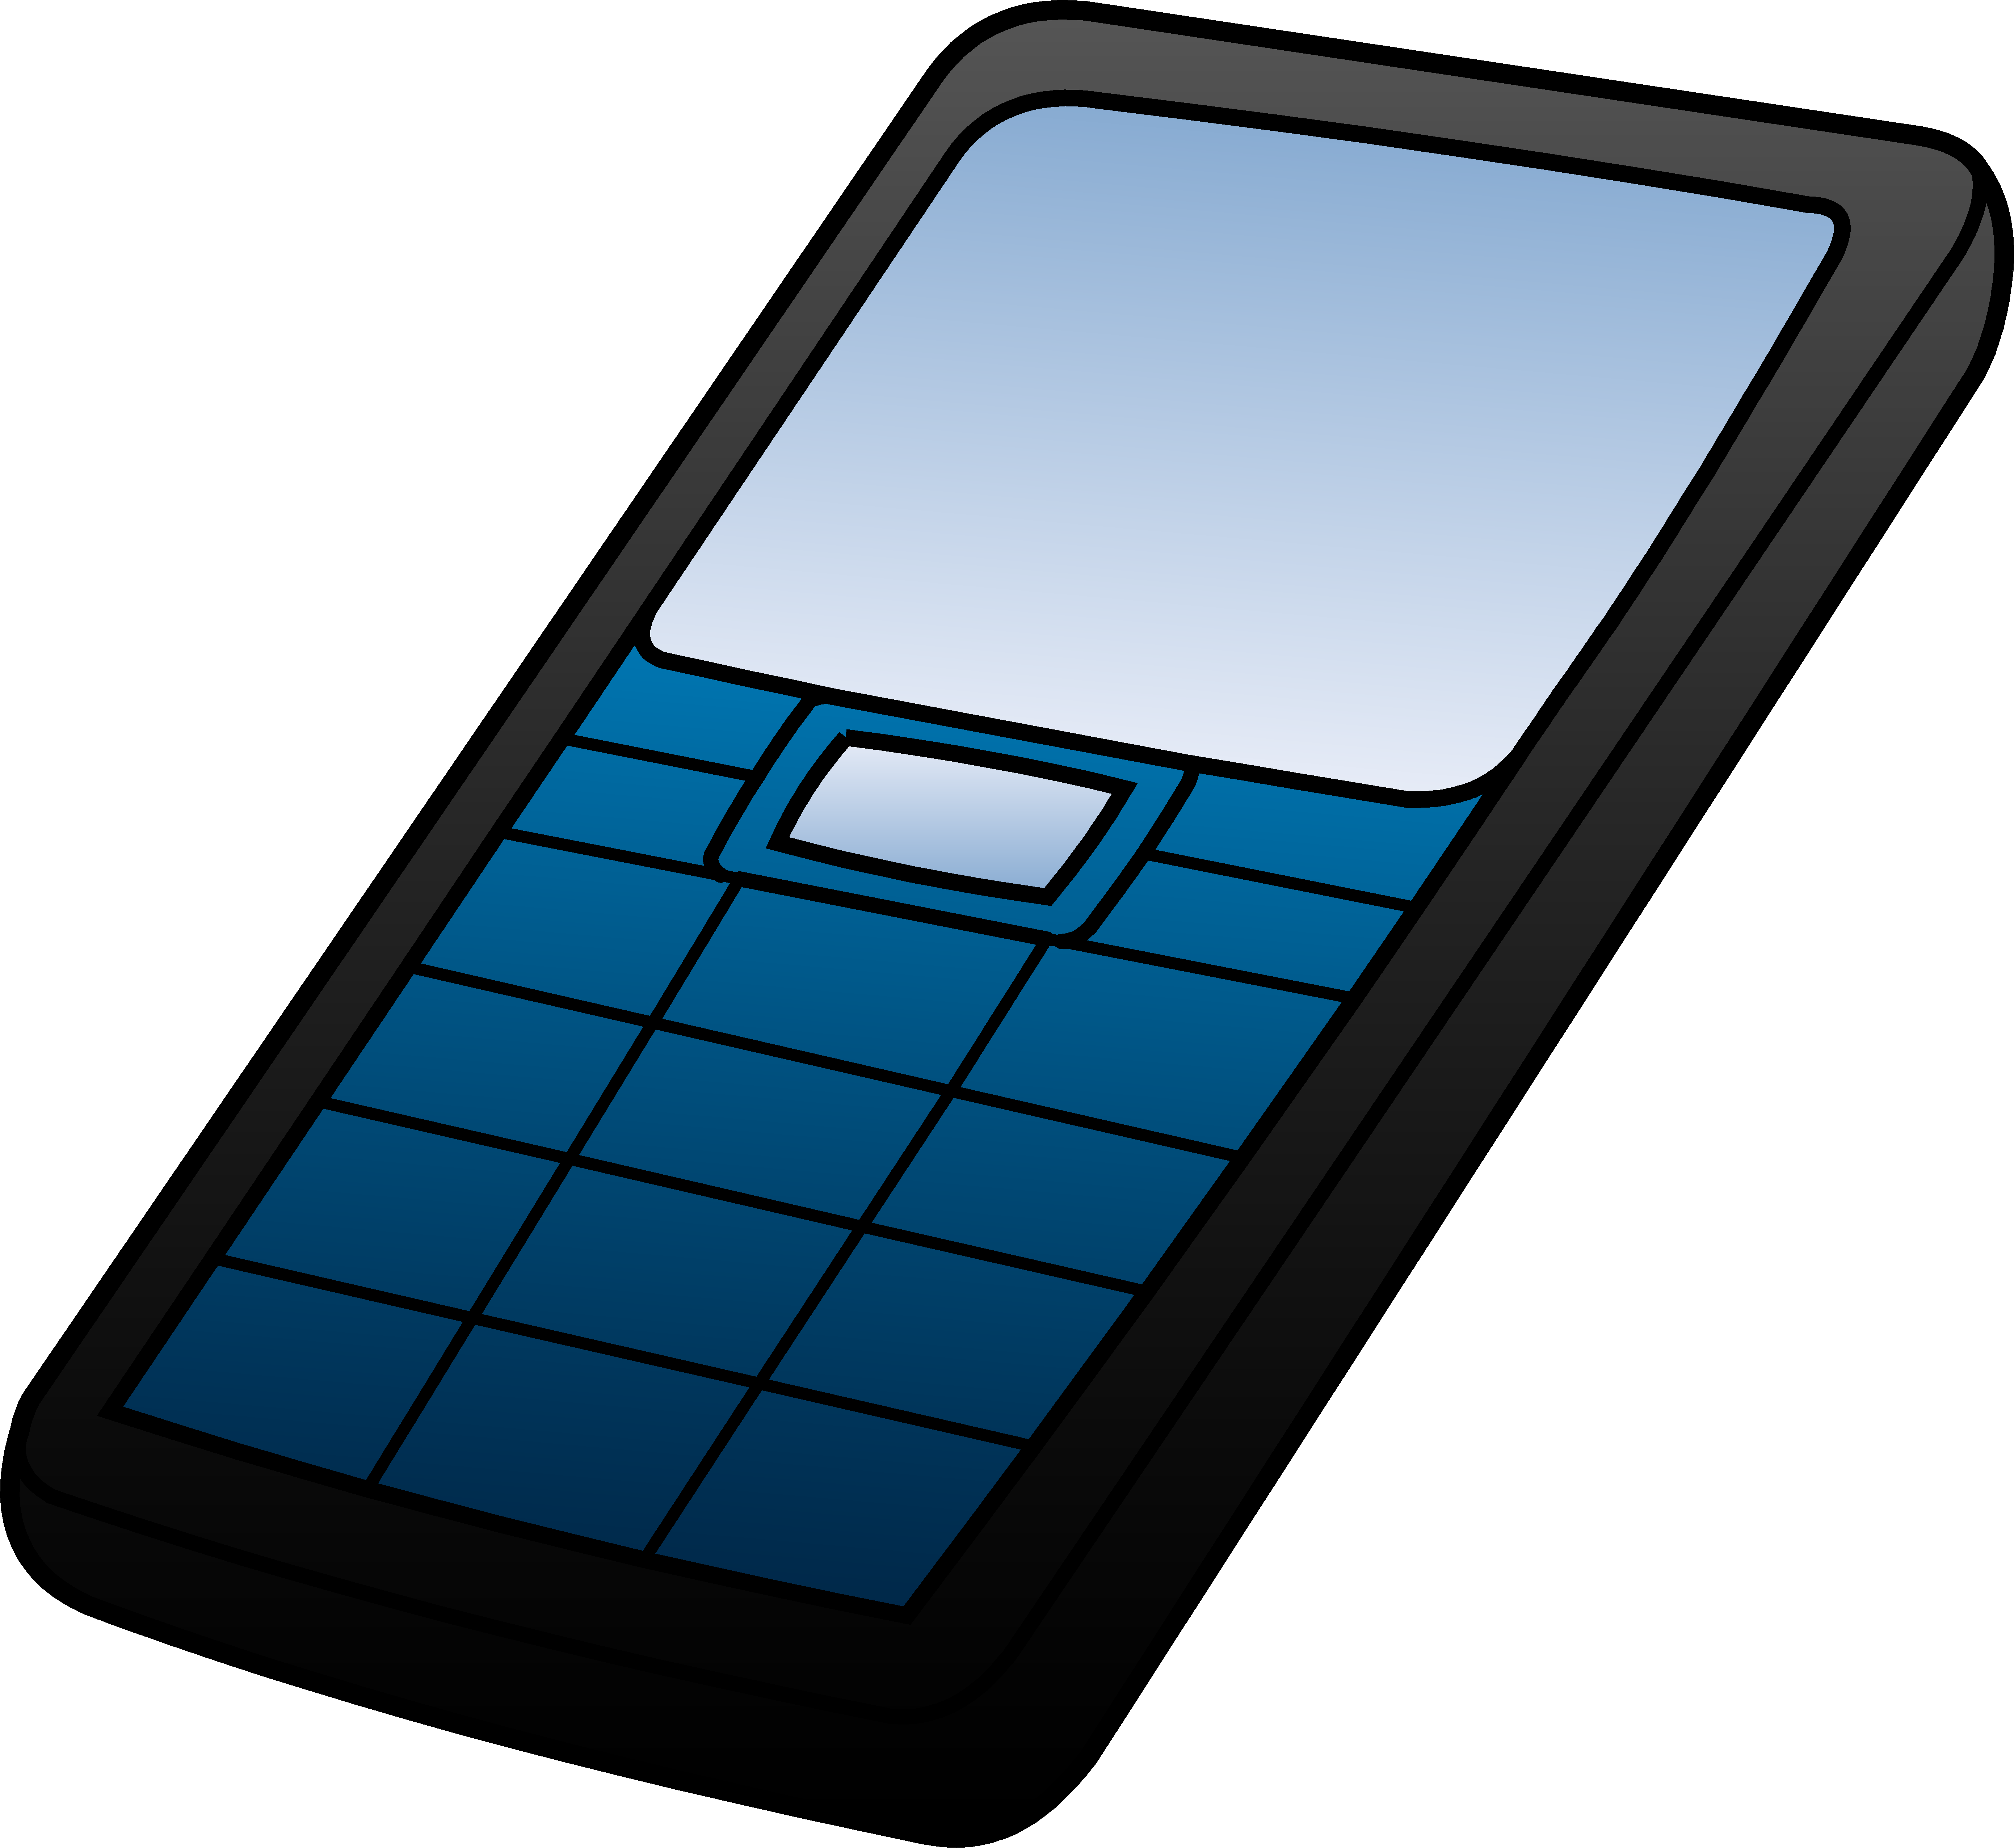 Blue and Black Cell Phone Design - Free Clip Art